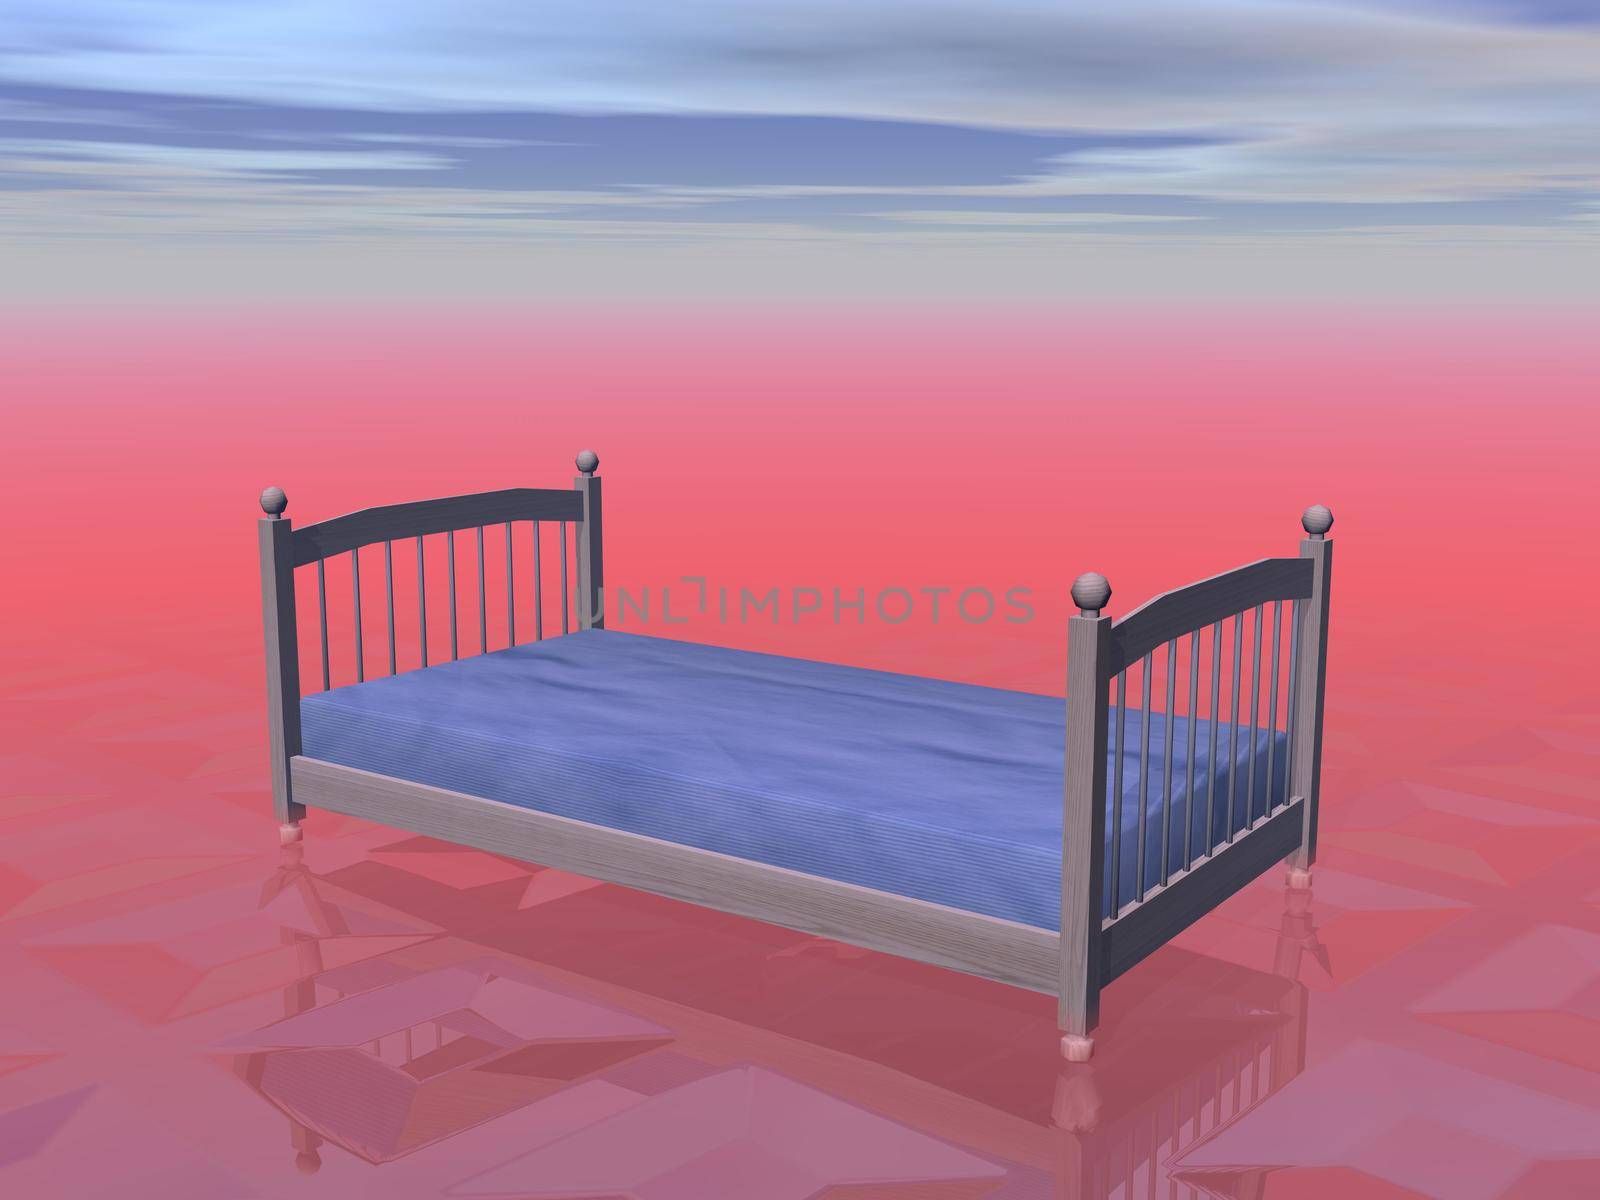 A simple bed for one person in red cloudy background